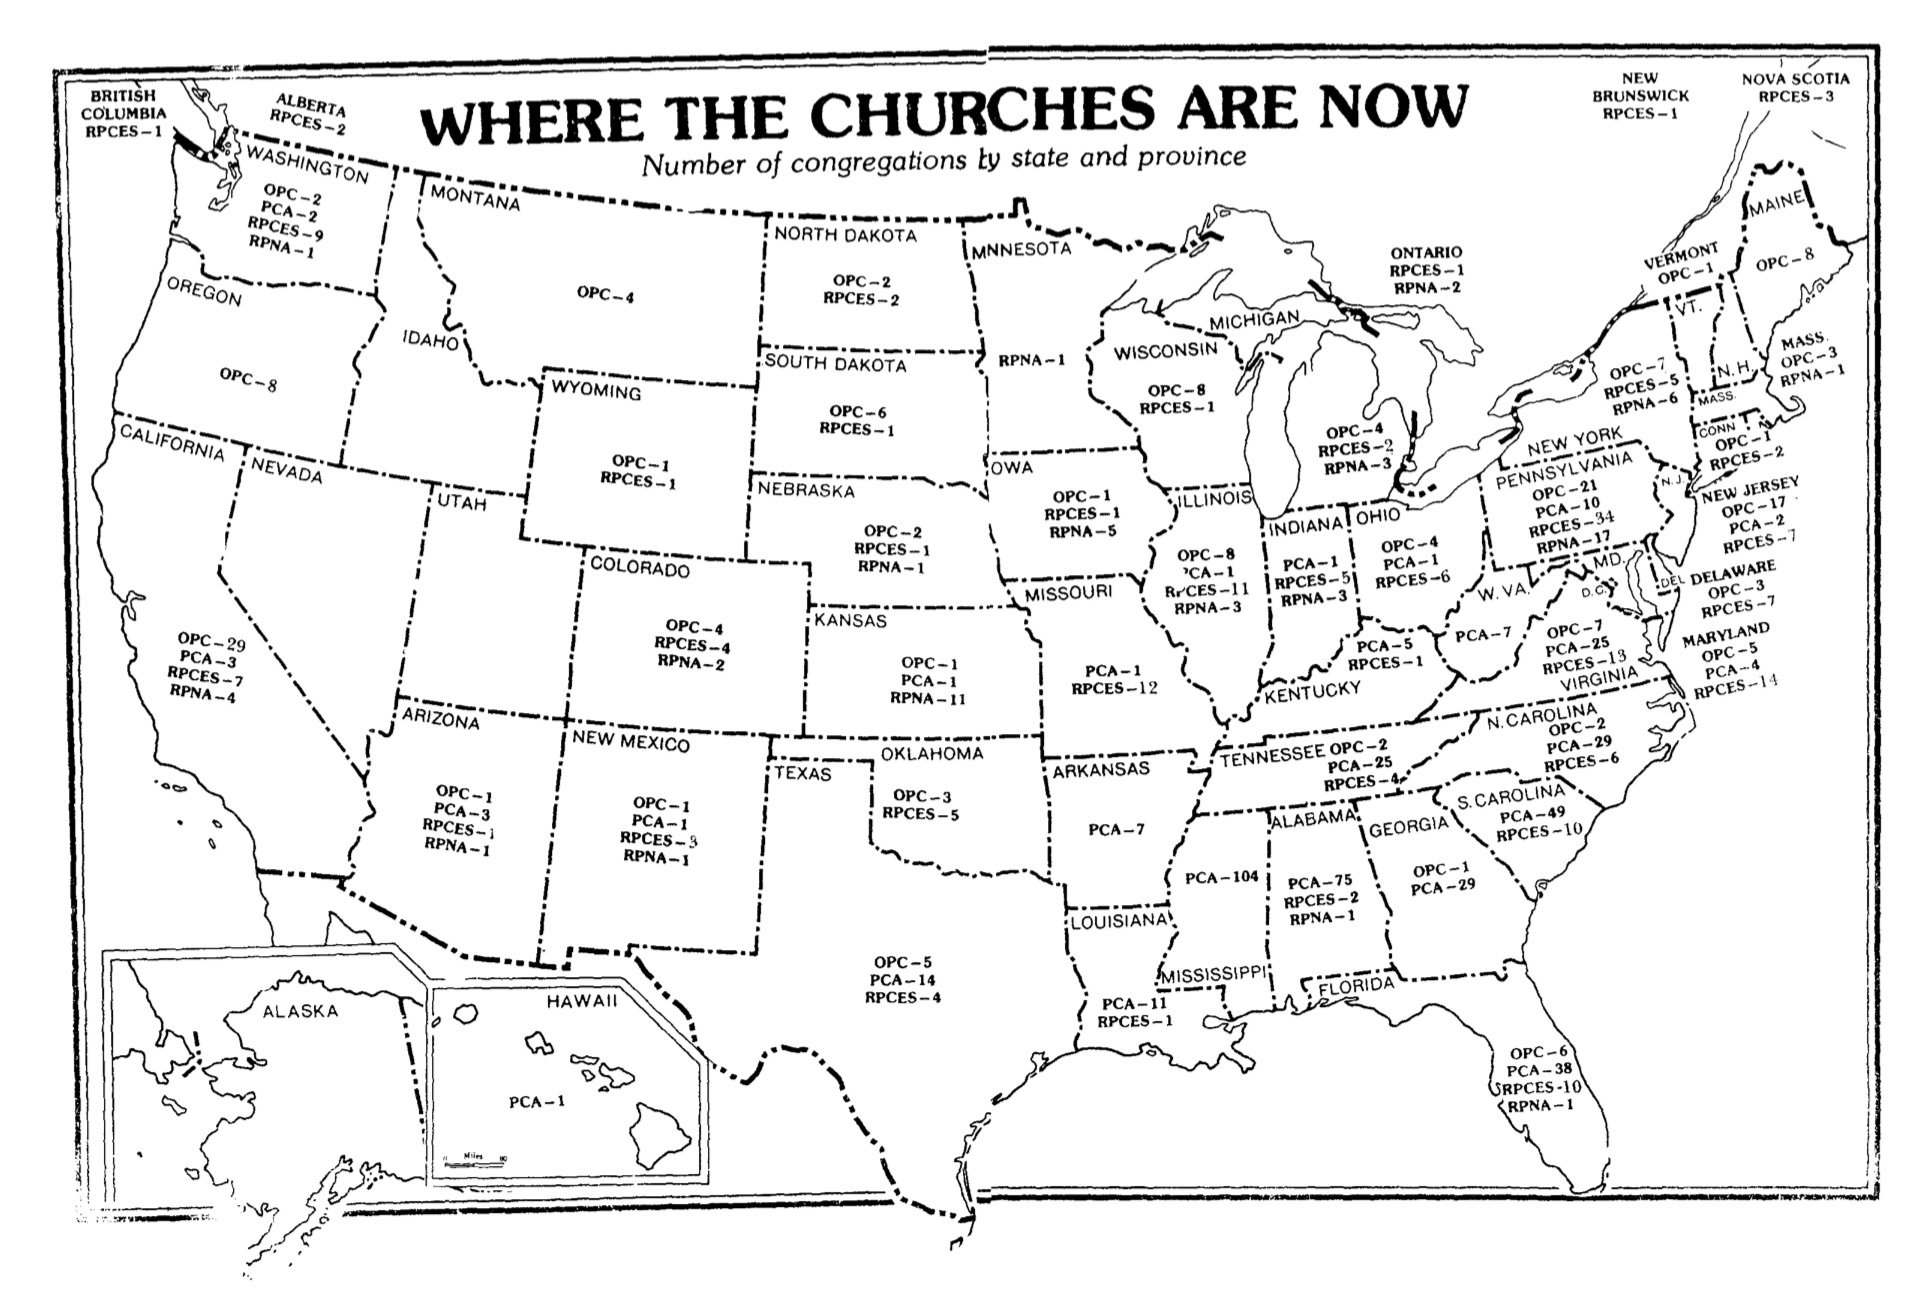 A map of the distribution of PCA, OPC, and RPCES congregations in 1979.